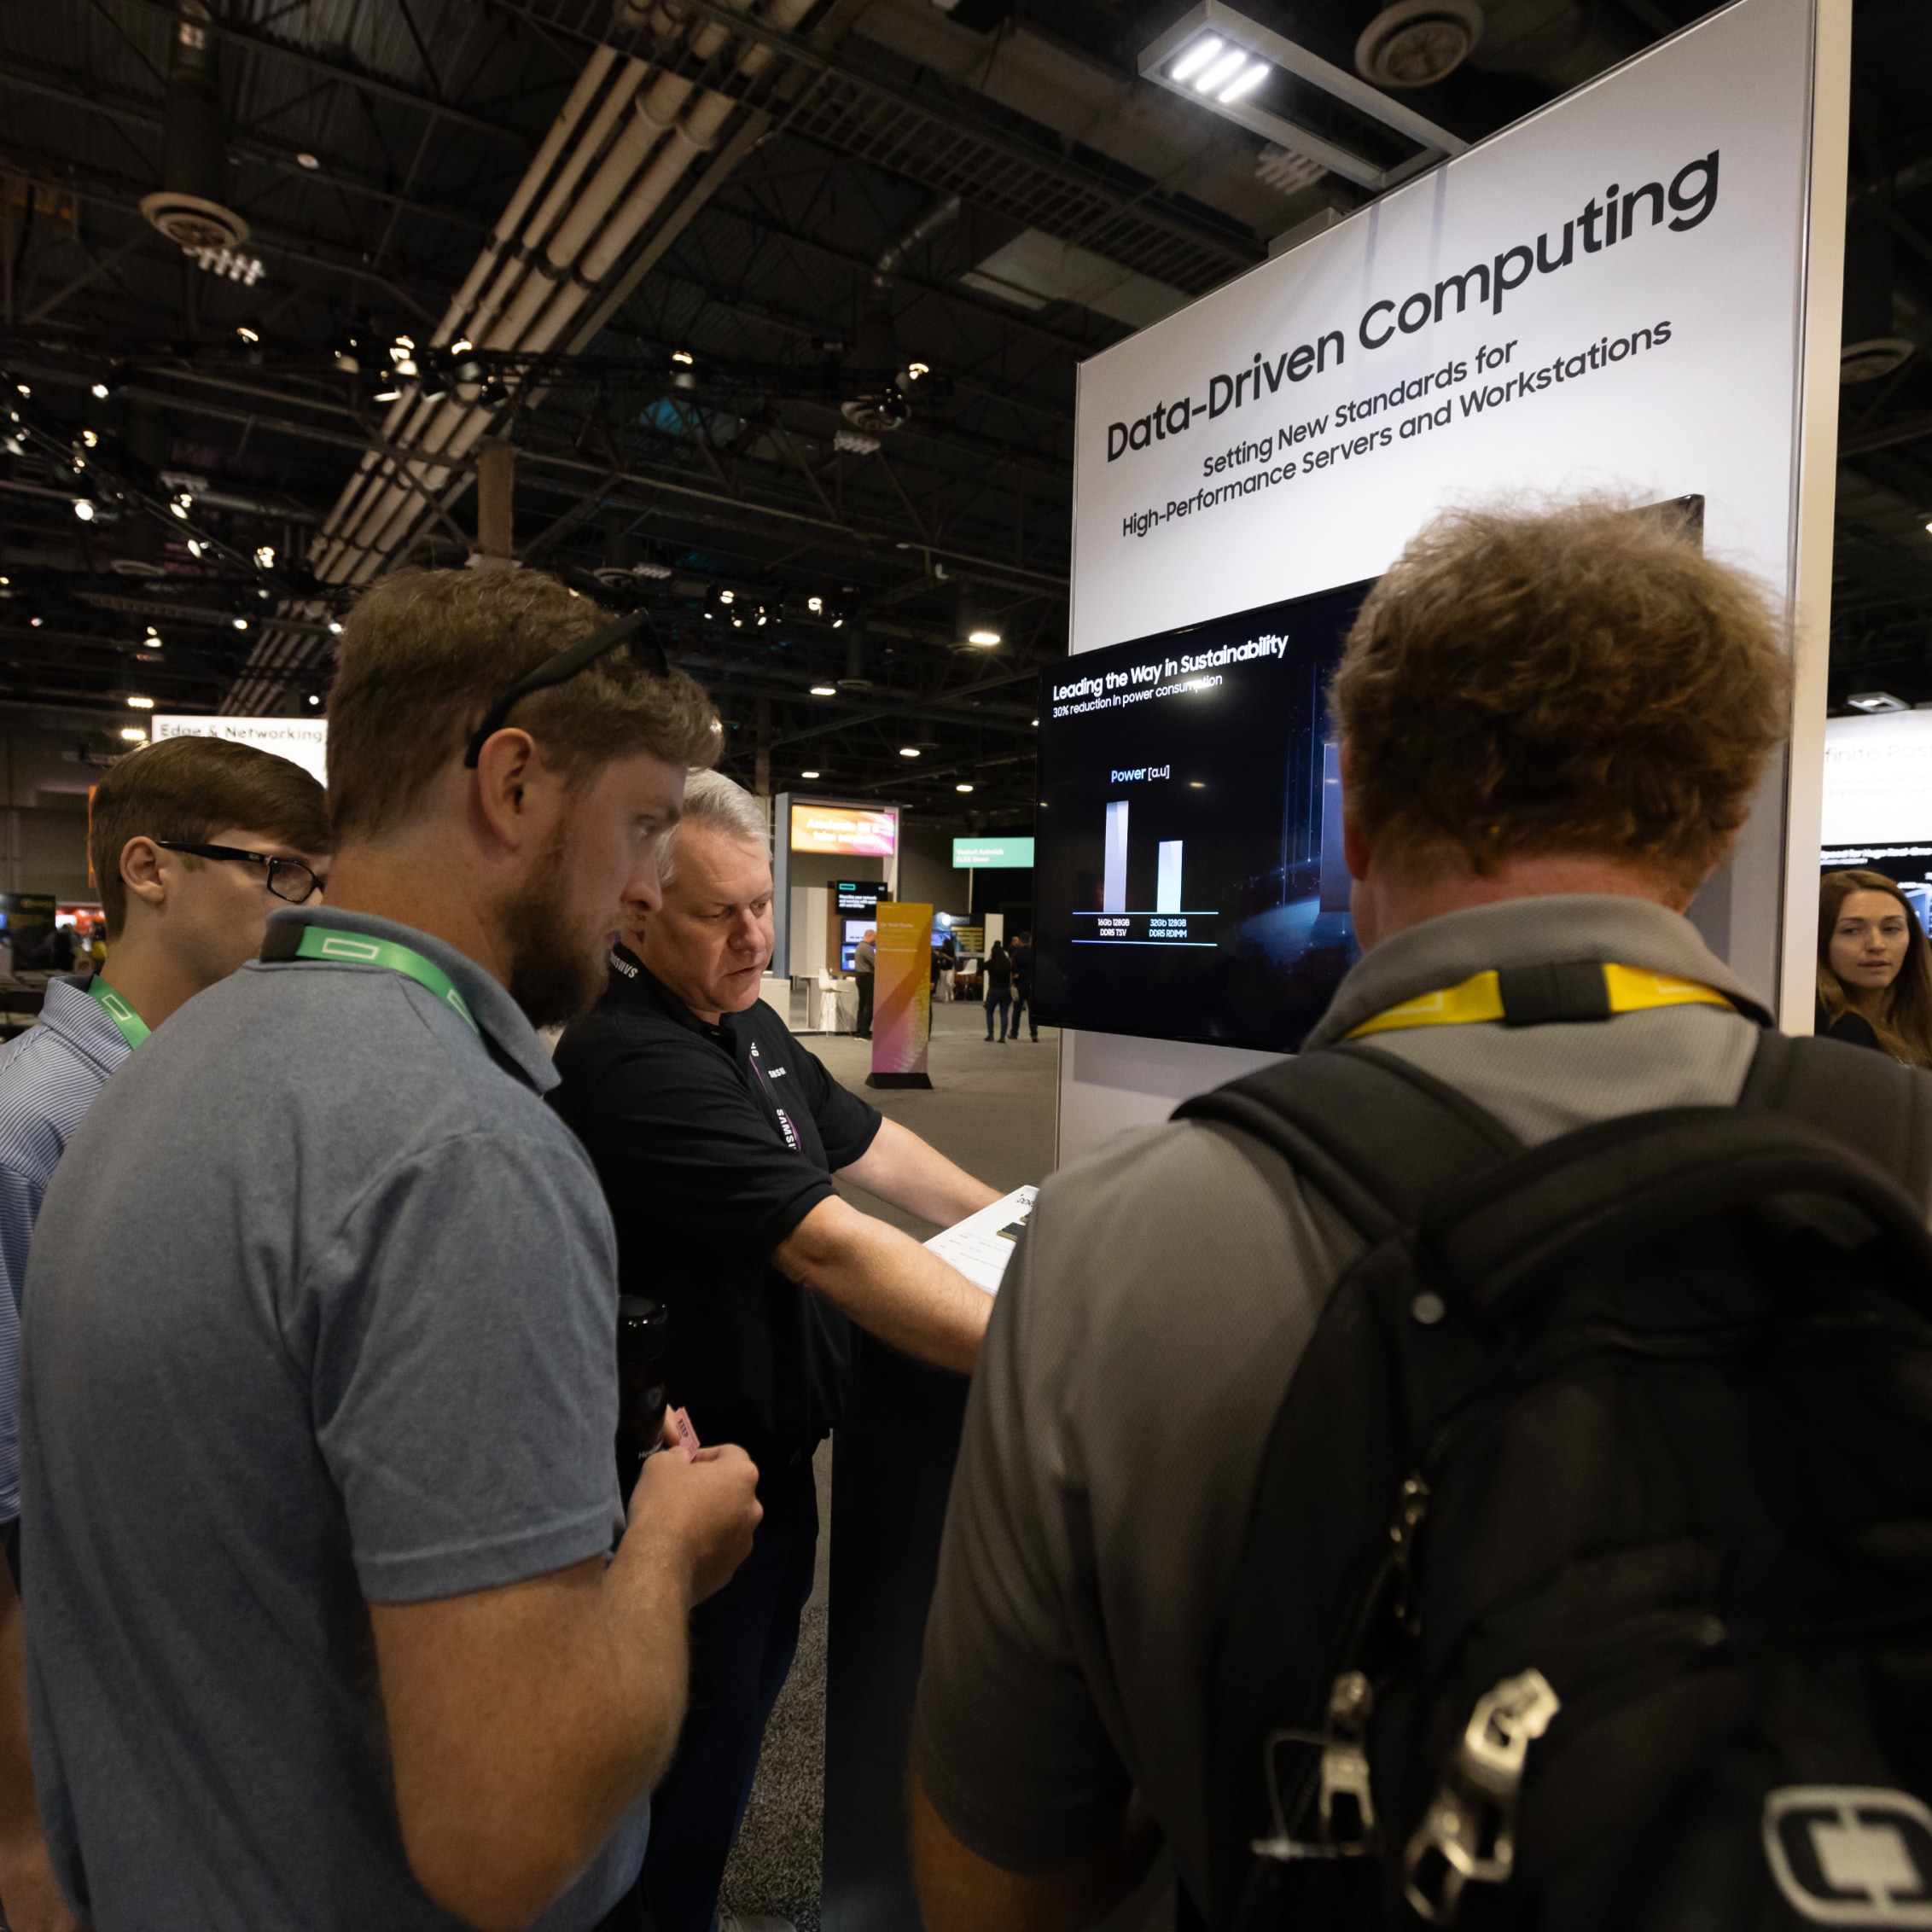 Attendees at HPE Discover 2024 gathering around a Samsung Data-Driven Computing display, learning about new standards for high-performance servers and workstations.